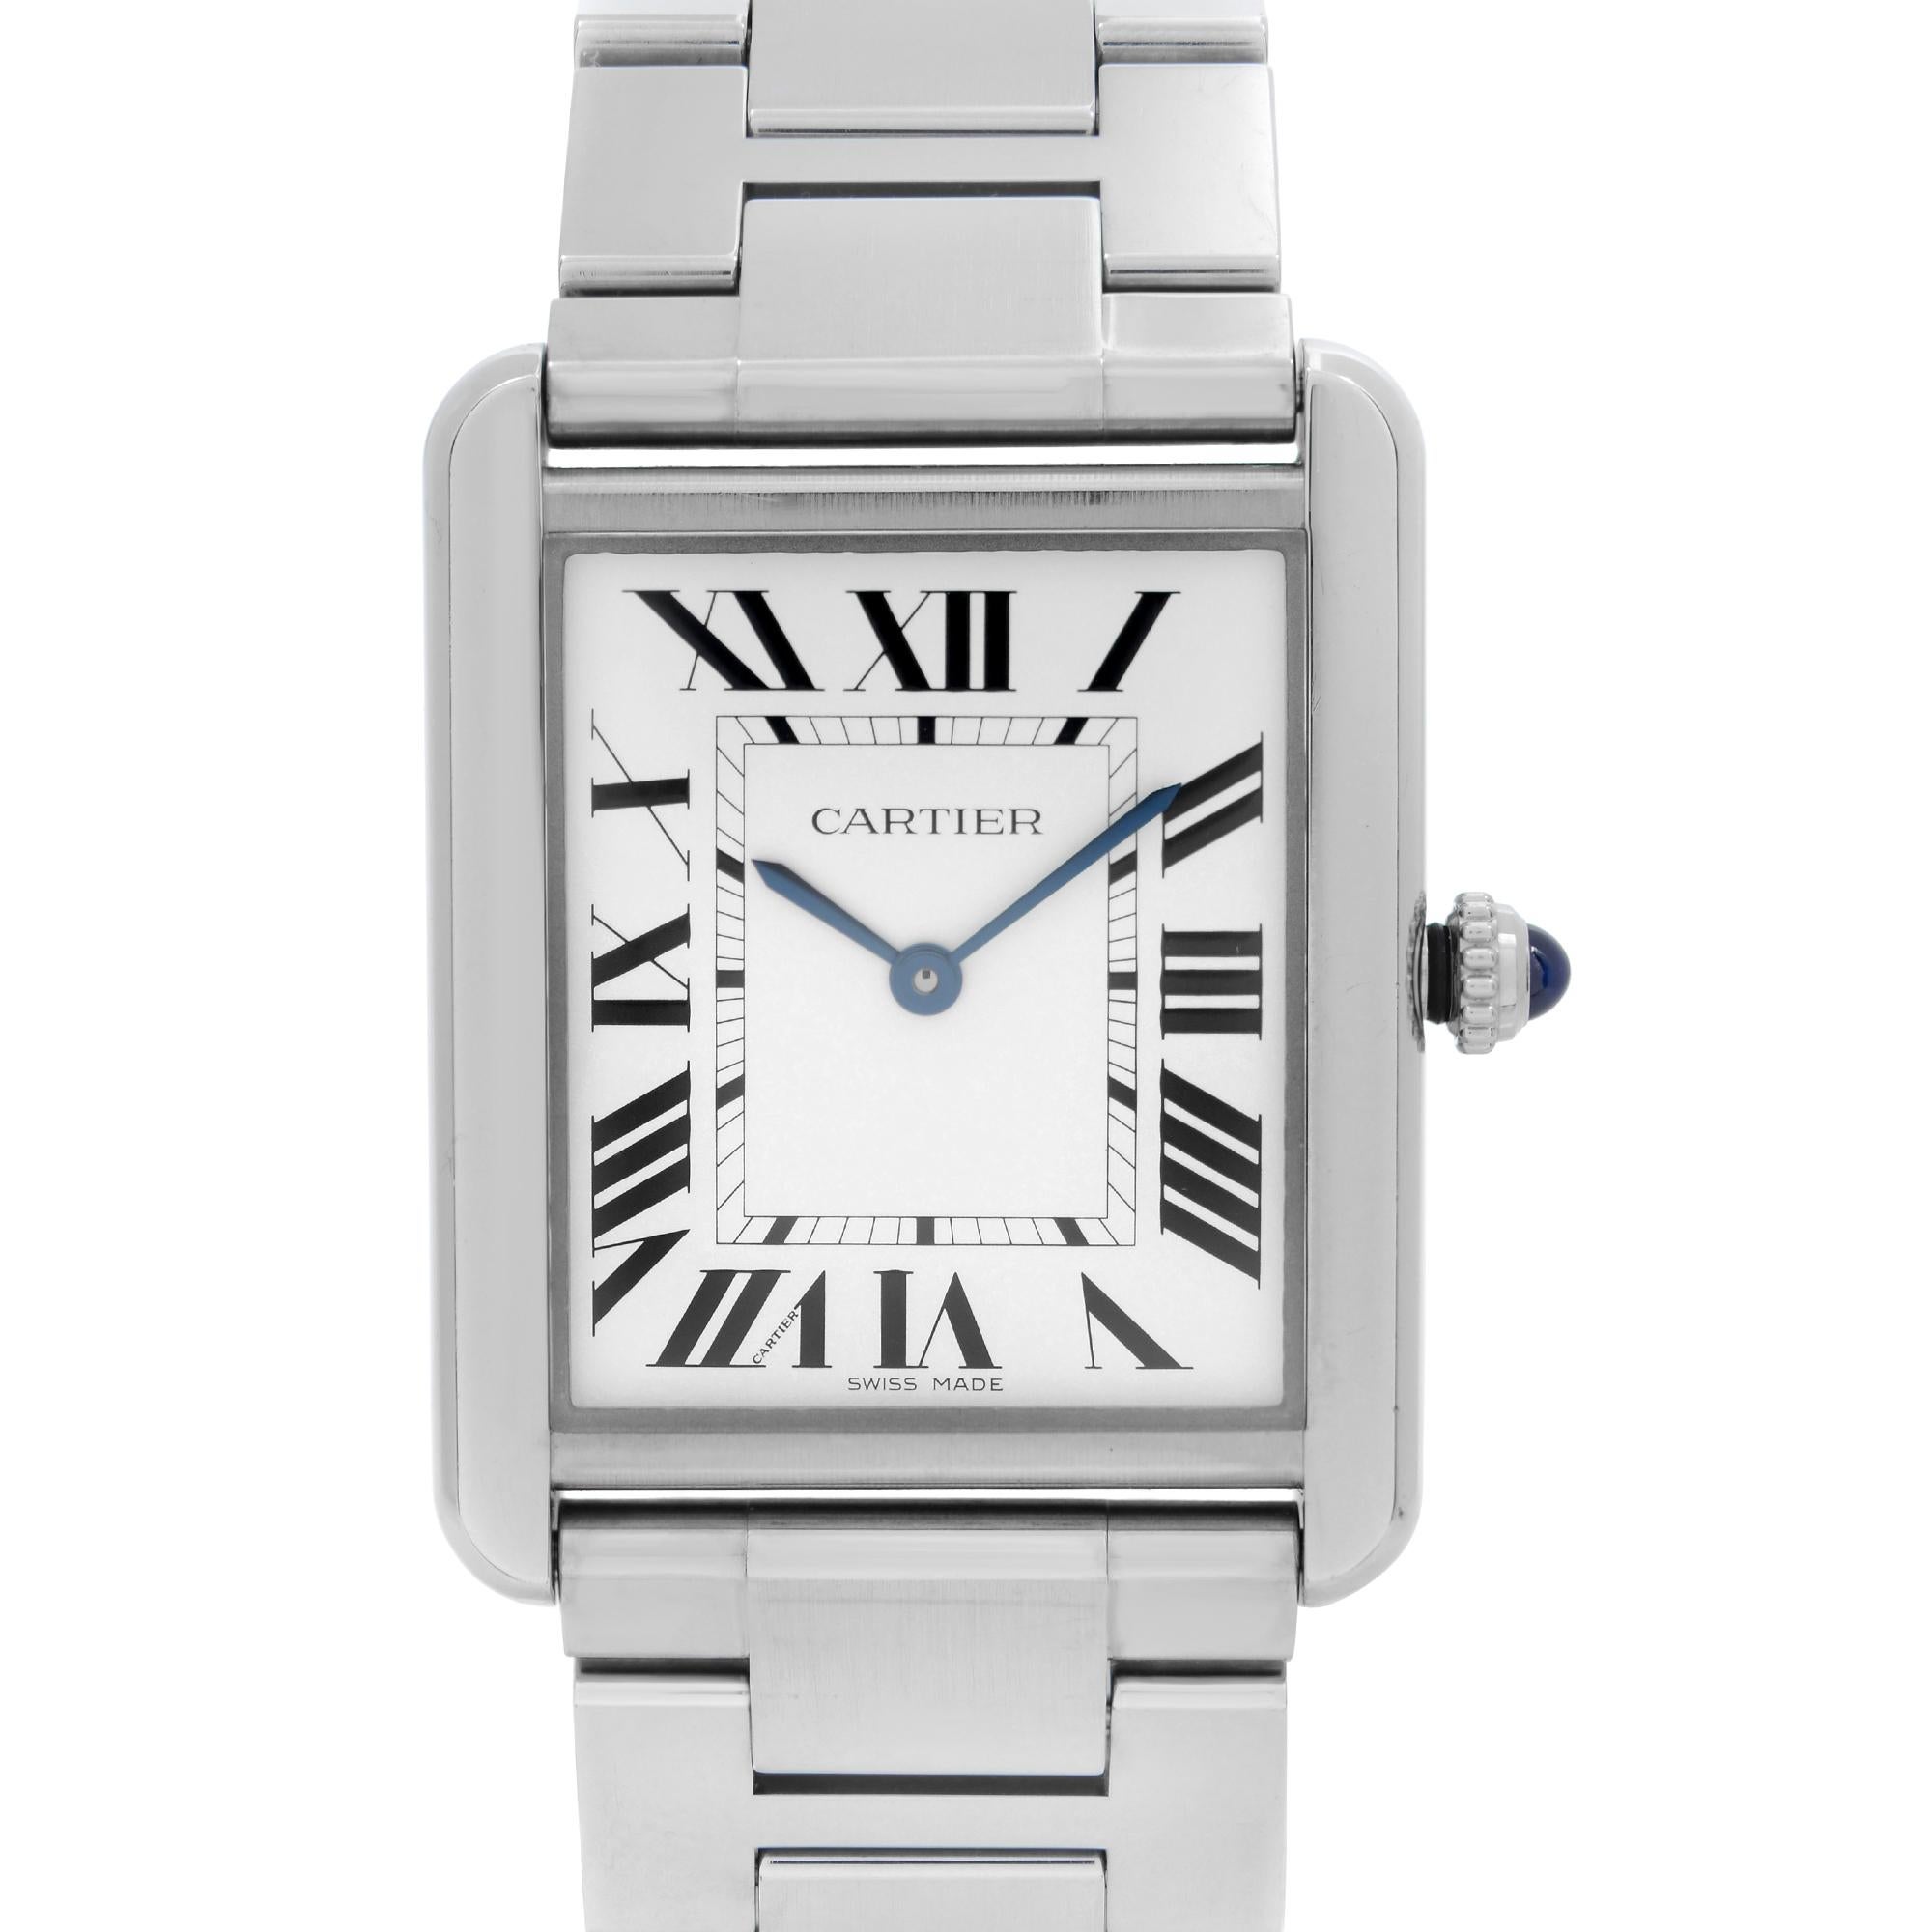 Pre-Owned Cartier Tank Solo 27mm Stainless Steel Silver Dial Unisex Quartz Watch W5200014. The Watch is powered by a Quartz Movement. This Beautiful Timepiece Features: Polished Stainless Steel Case and Bracelet. Beaded crown set with a synthetic